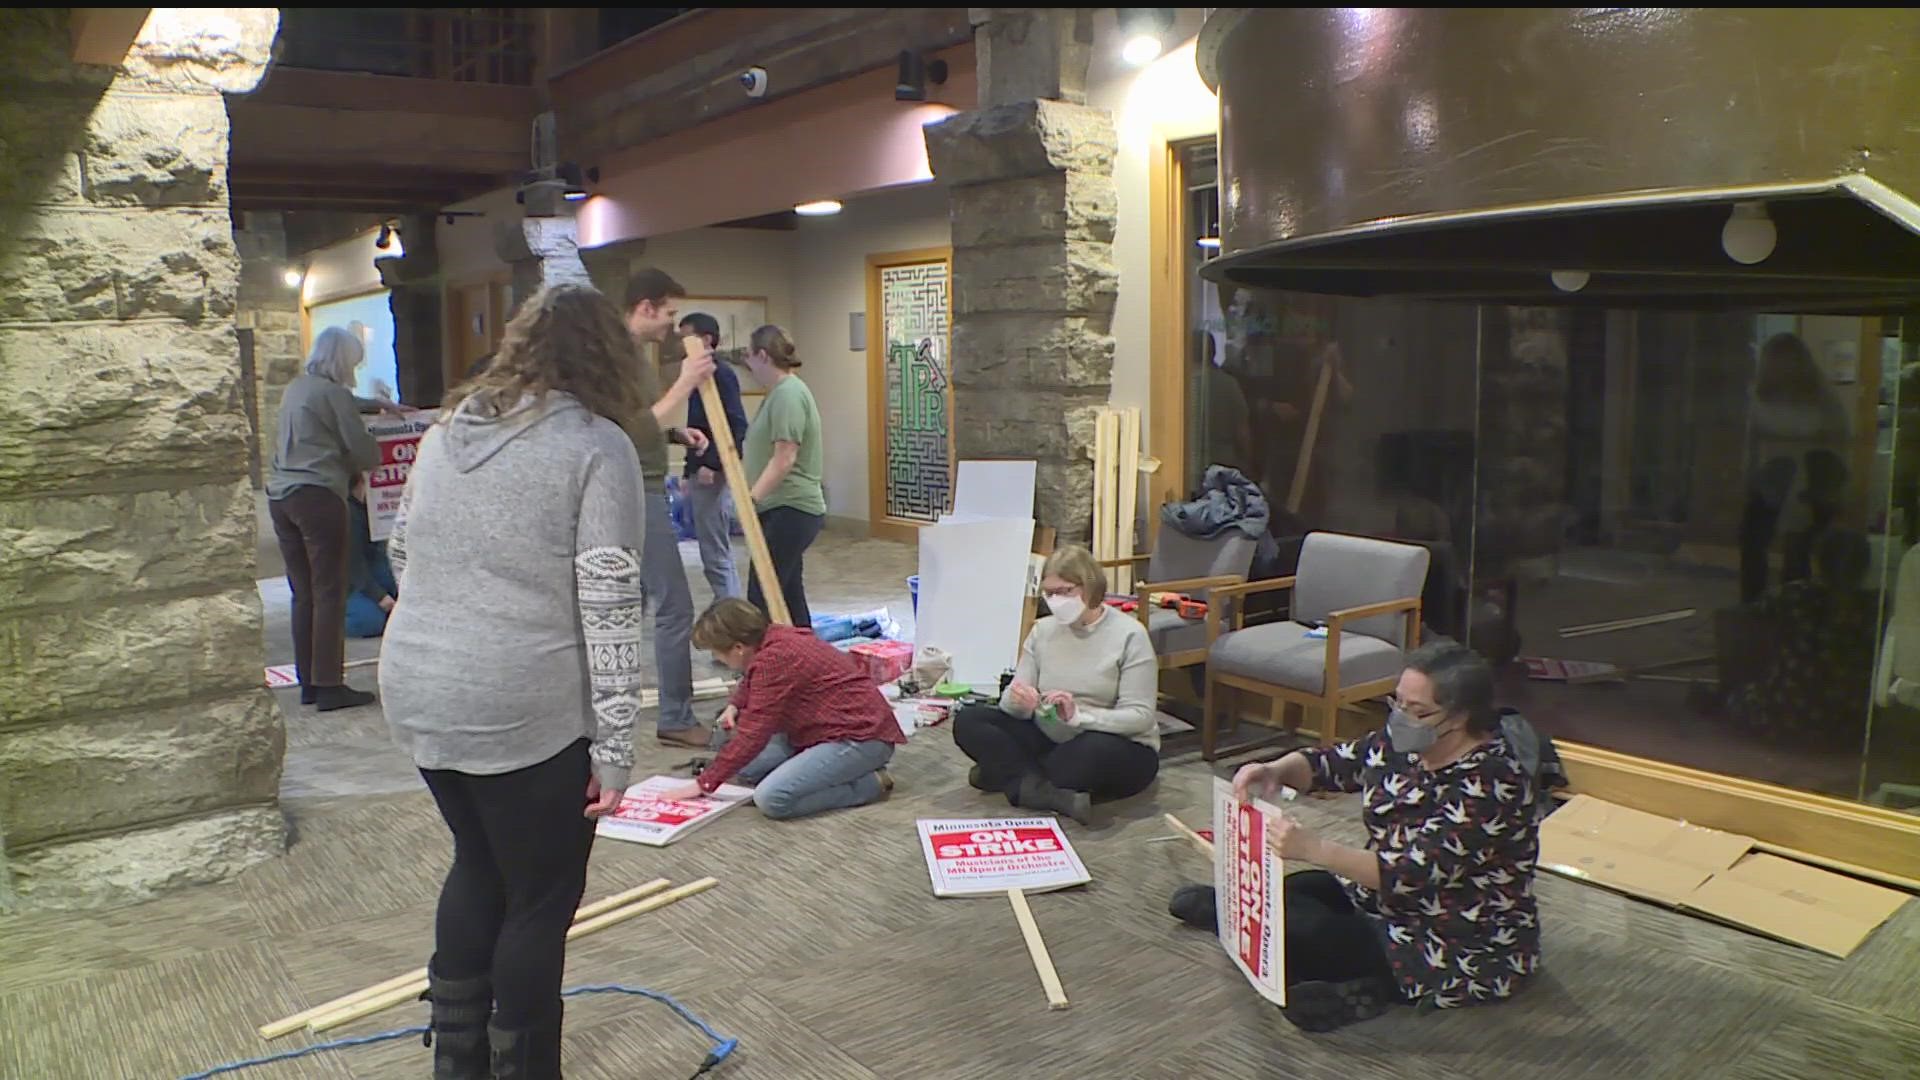 The MN Opera Orchestra, who are part of the Twin Cities Musicians Union, made preparations on Sunday afternoon ahead of a potential strike.